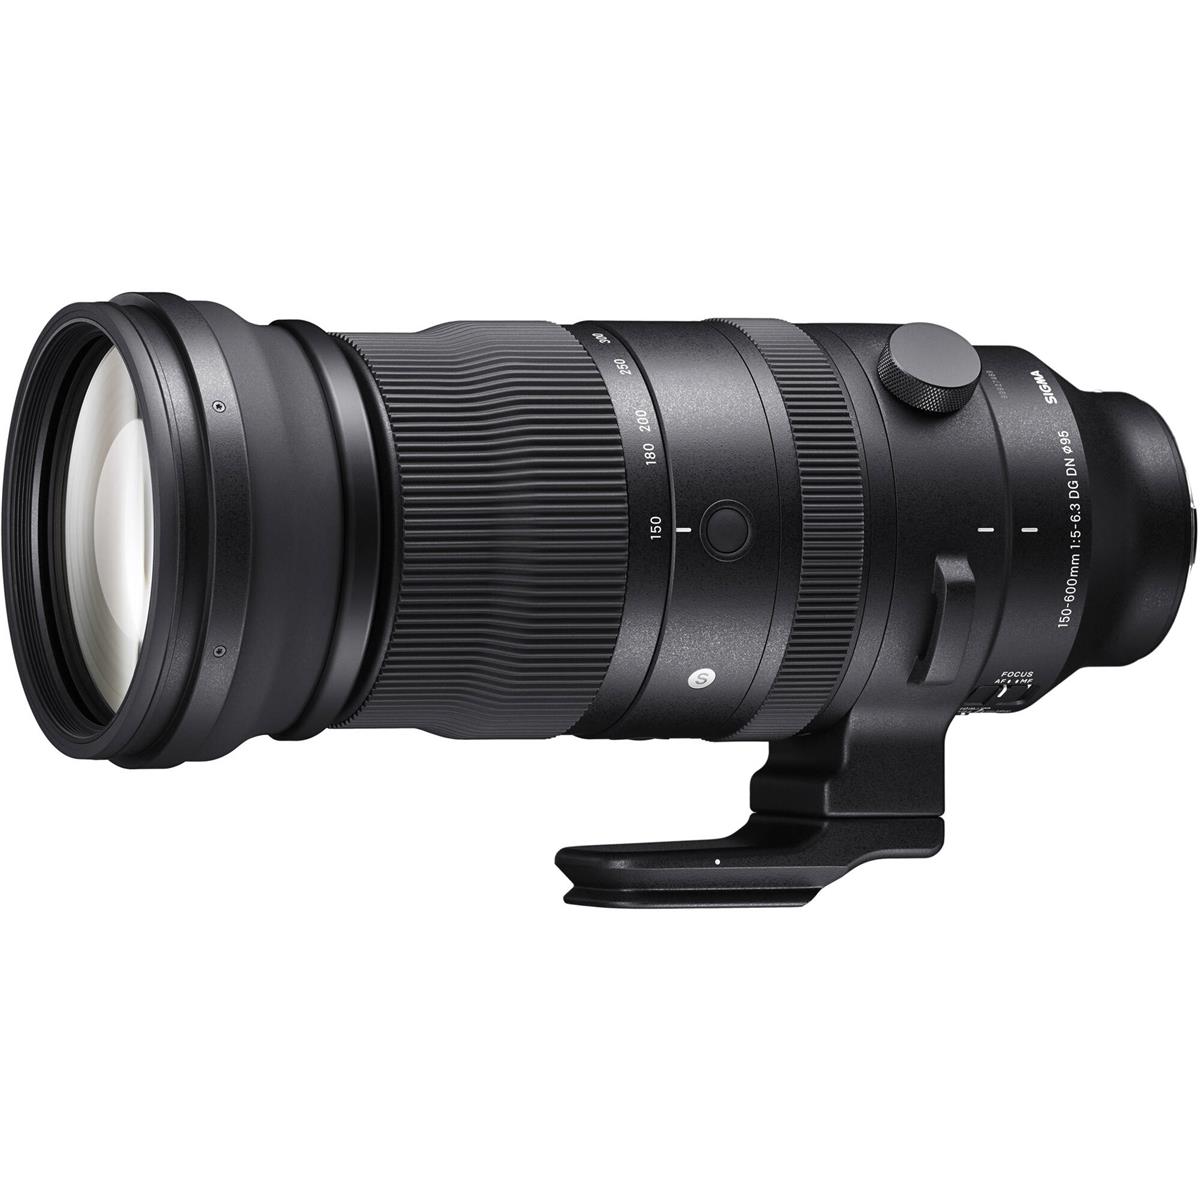 Sigma 150-600mm F5-6.3 DG DN OS Sports lens for Sony E